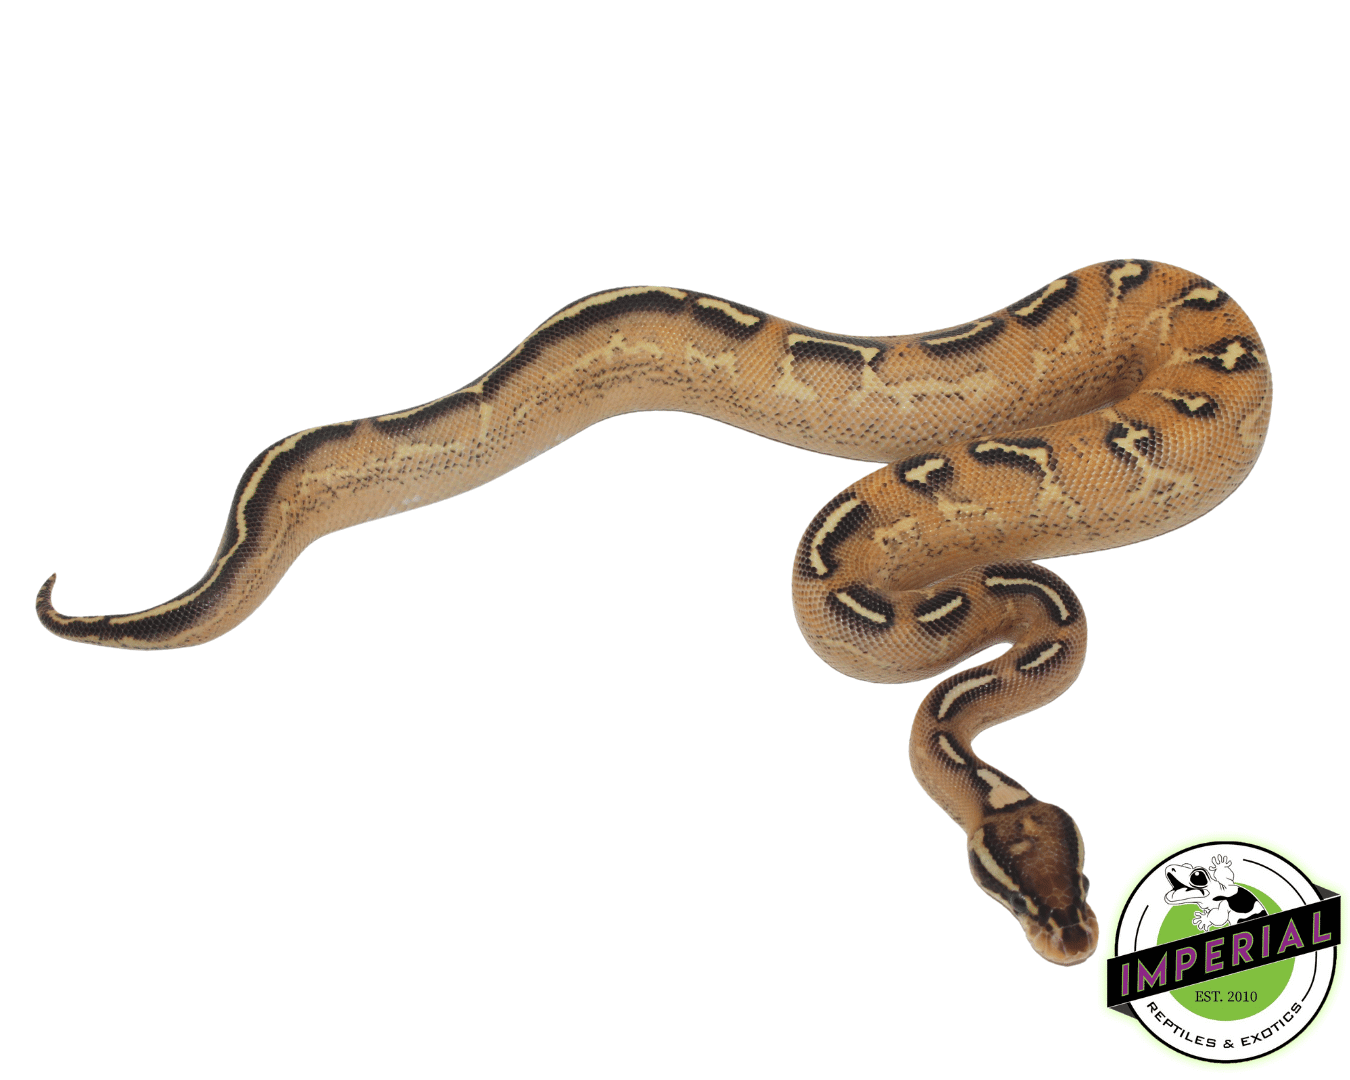 green pastel freeway ball python for sale, buy reptiles online